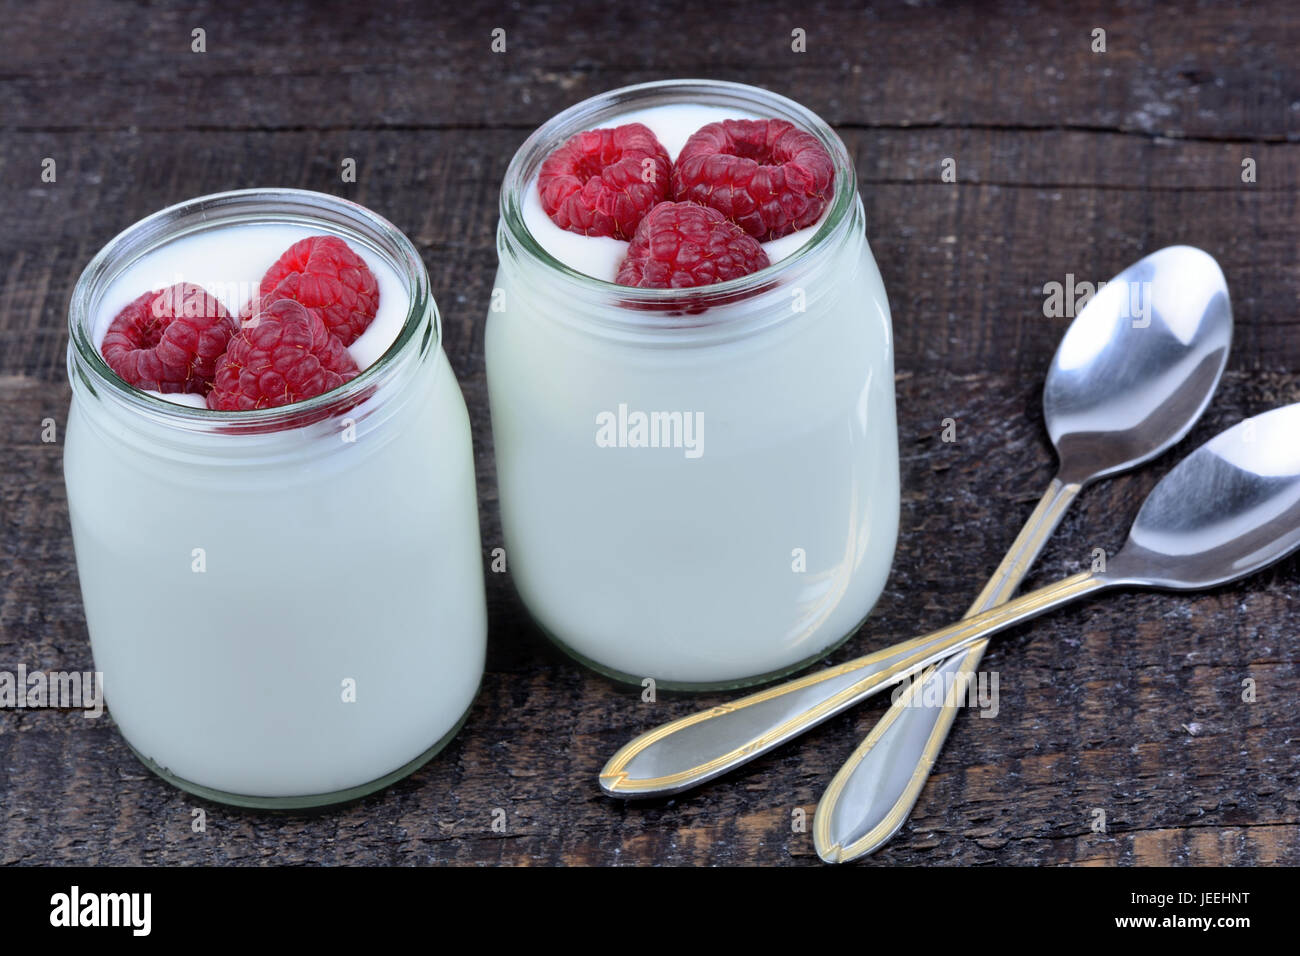 Raspberry with yogurt in a jars on wooden table Stock Photo